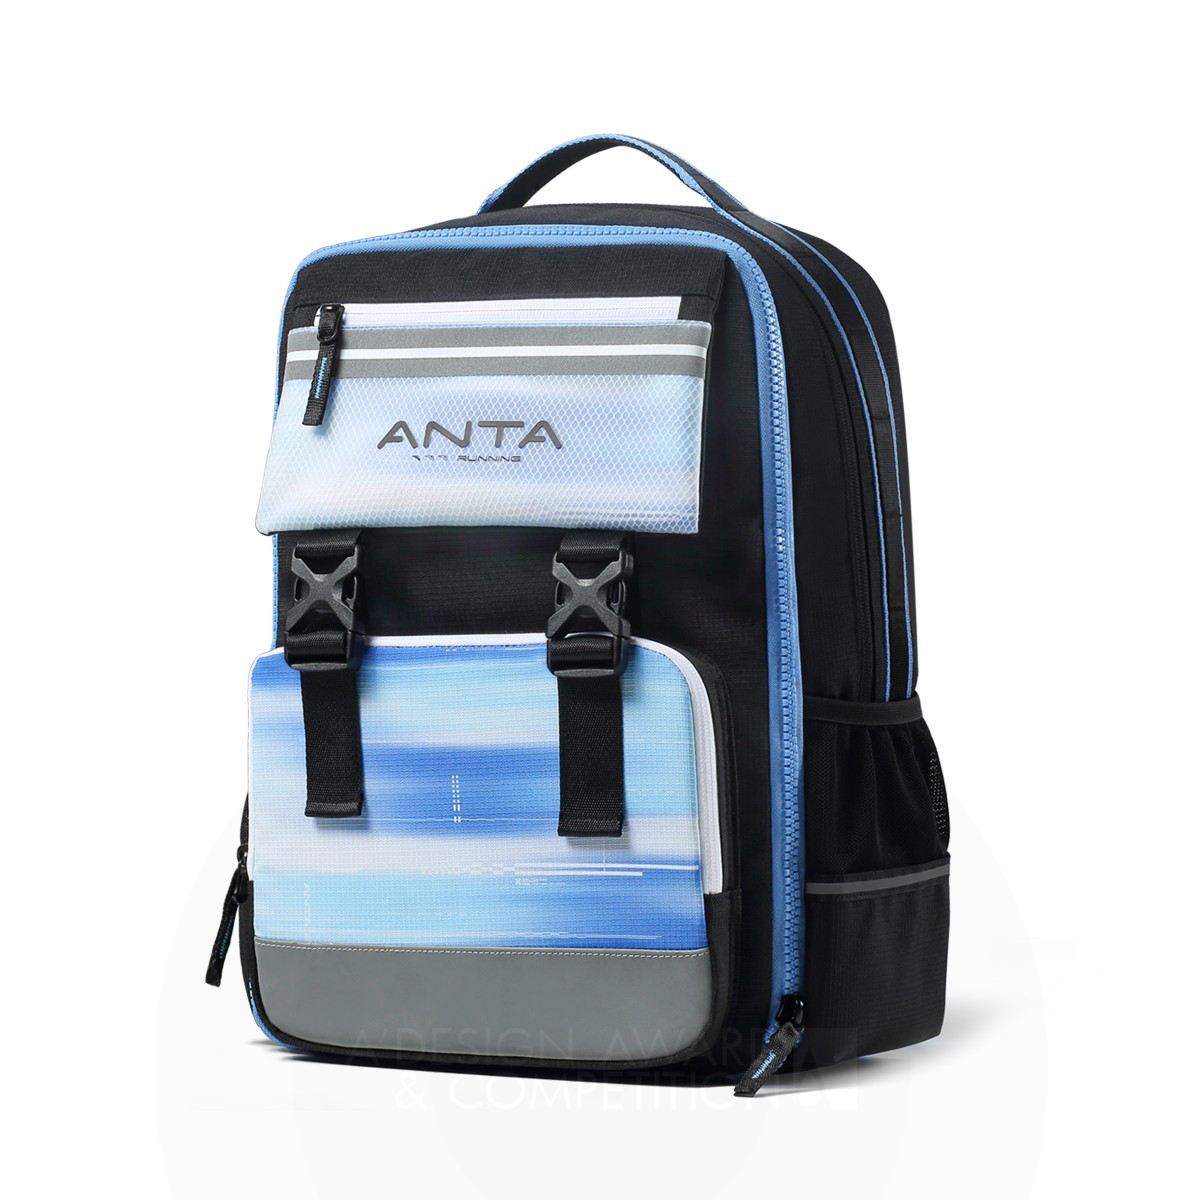 Balance and Decompression Version 2 Schoolbag by ANTA SPORTS PRODUCTS GROUP CO., LTD